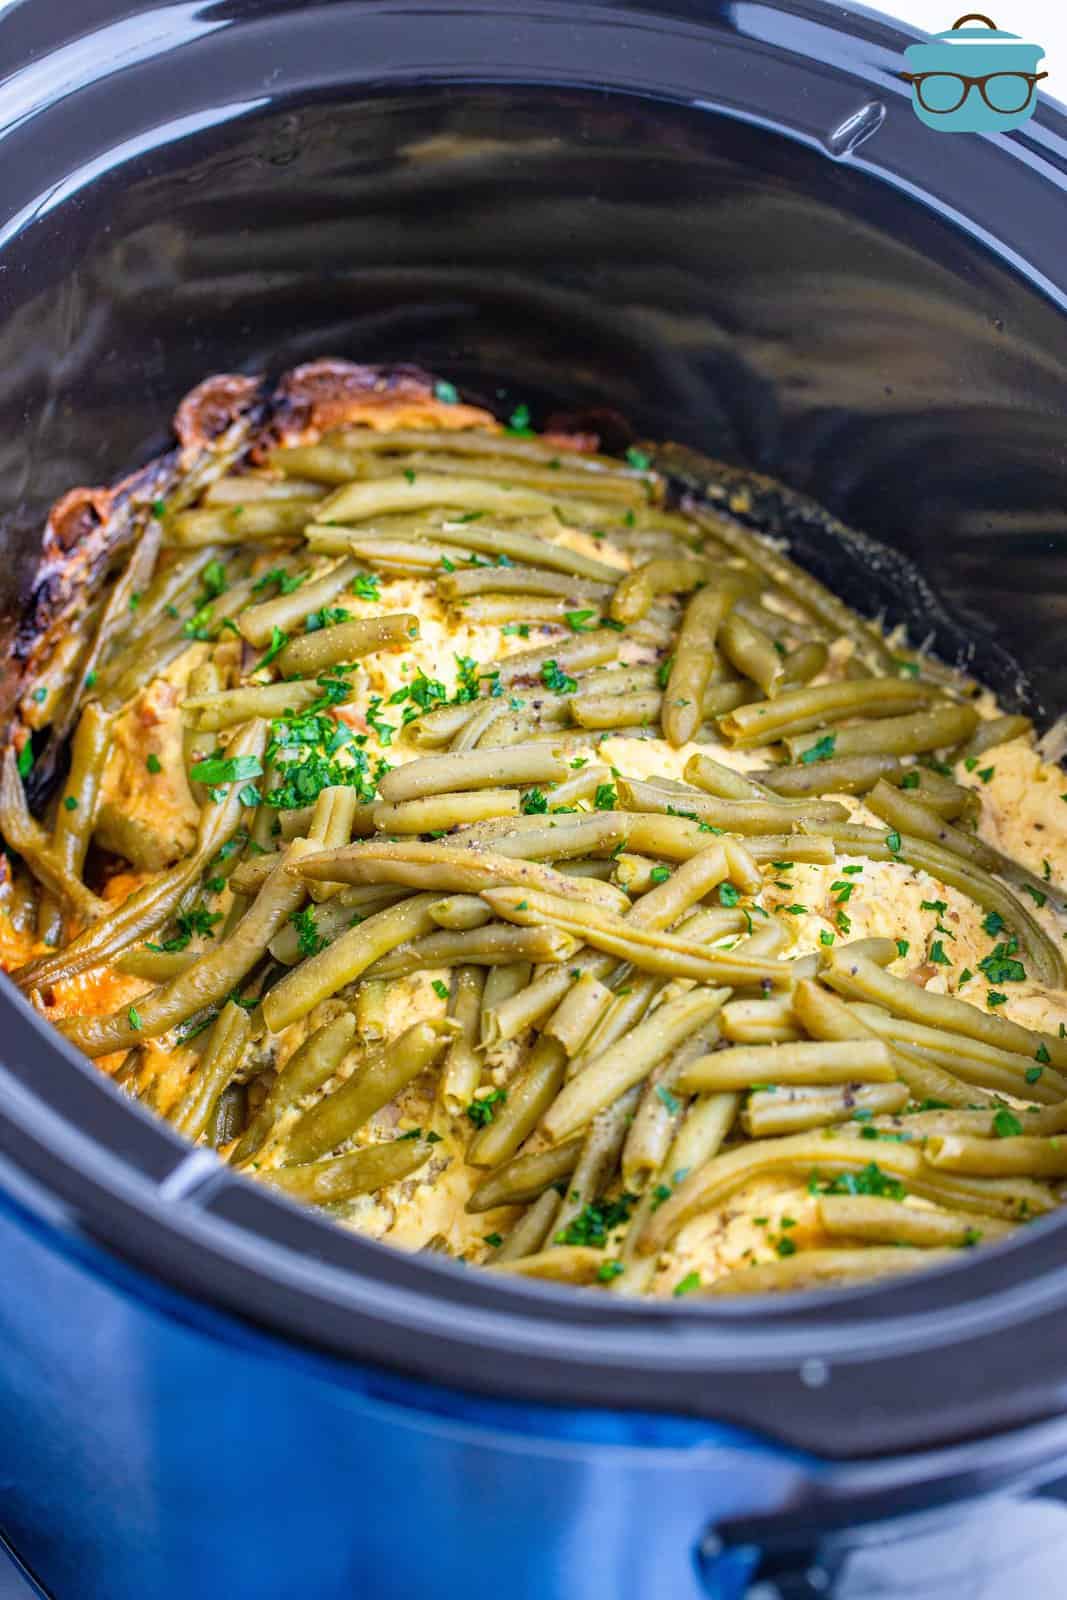 fully cooked chicken, stuffing and green beans shown in an oval crock pot.